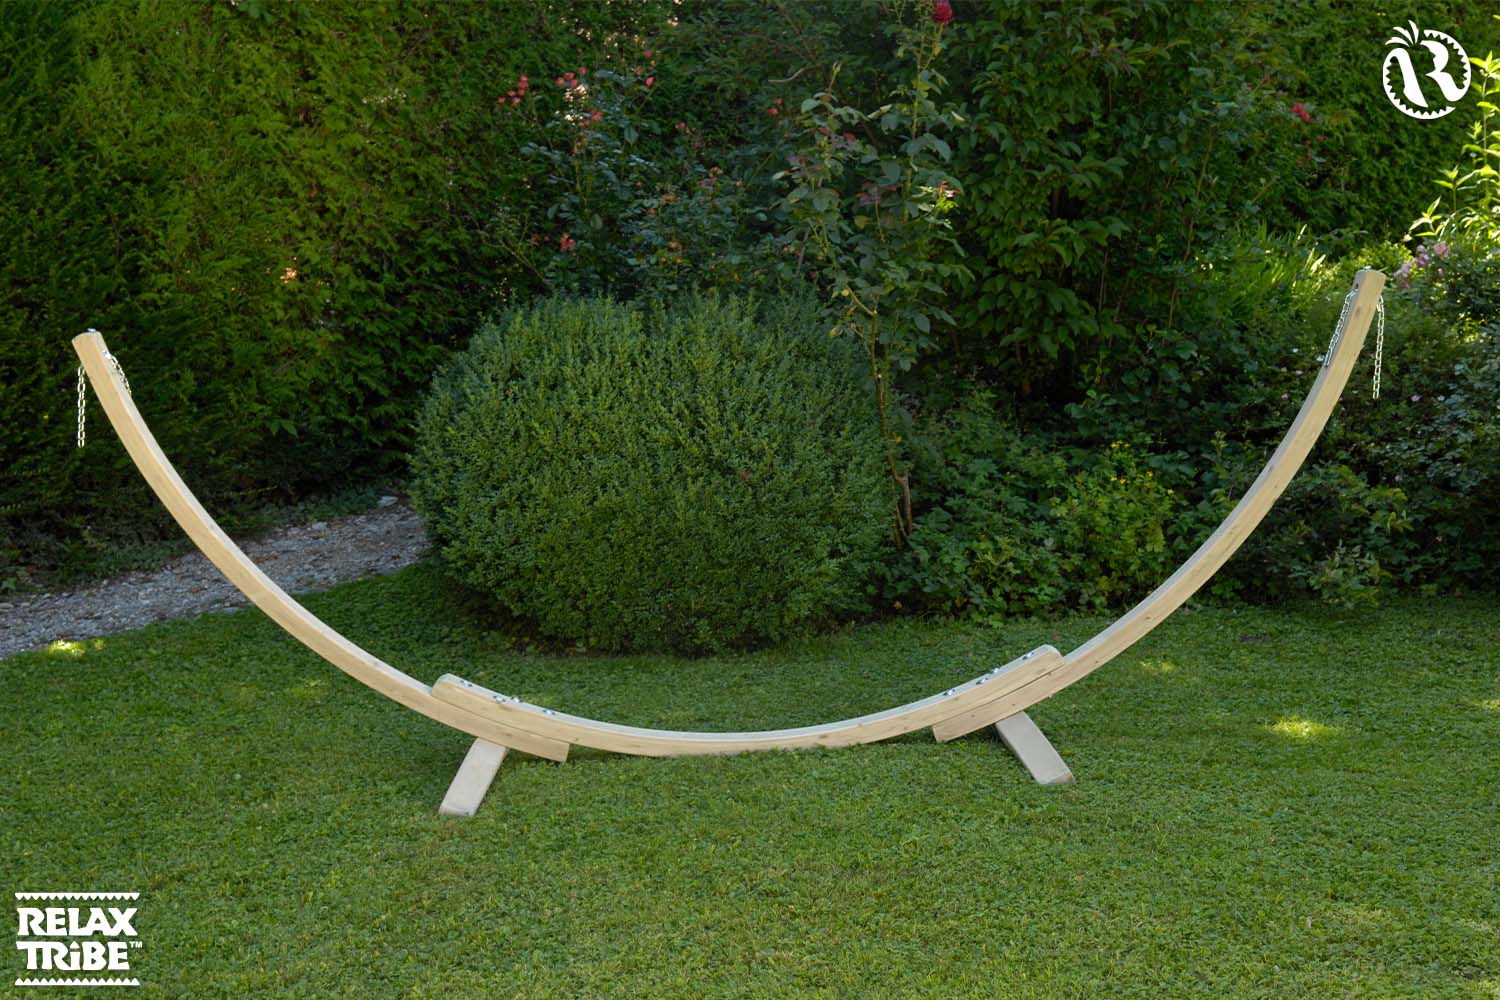 apollo-fsc-wood-stand-for-hammock-length-250-330cm-max-160kg-home-garden-weatherproof-natural-outdoor